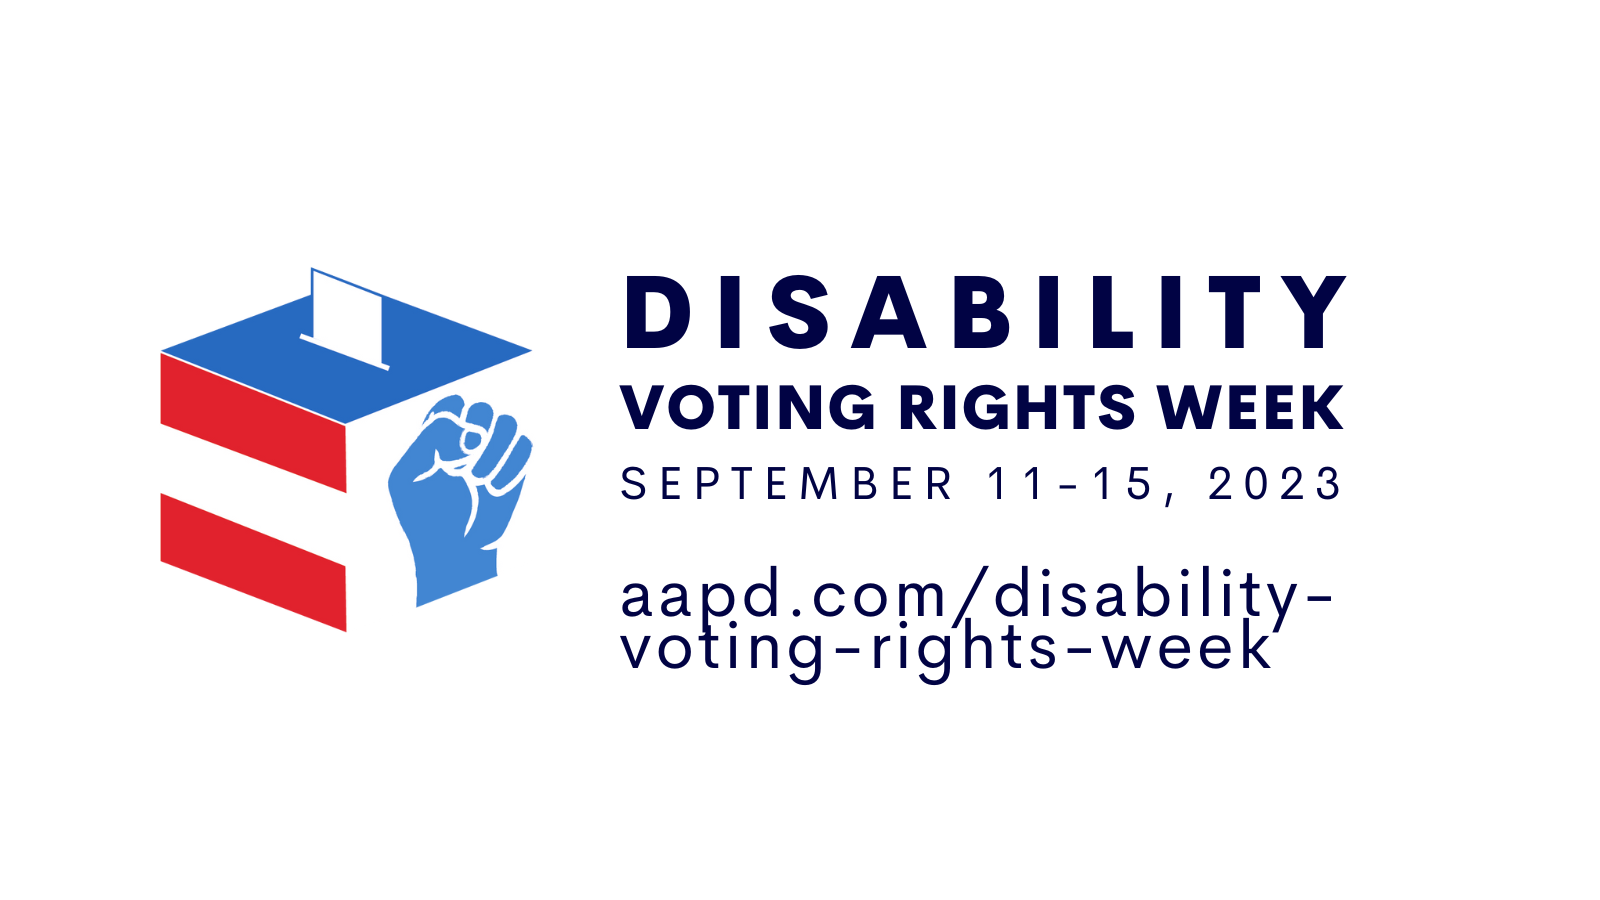 Disability Voting Rights Week logo and date September 11-15, 2023